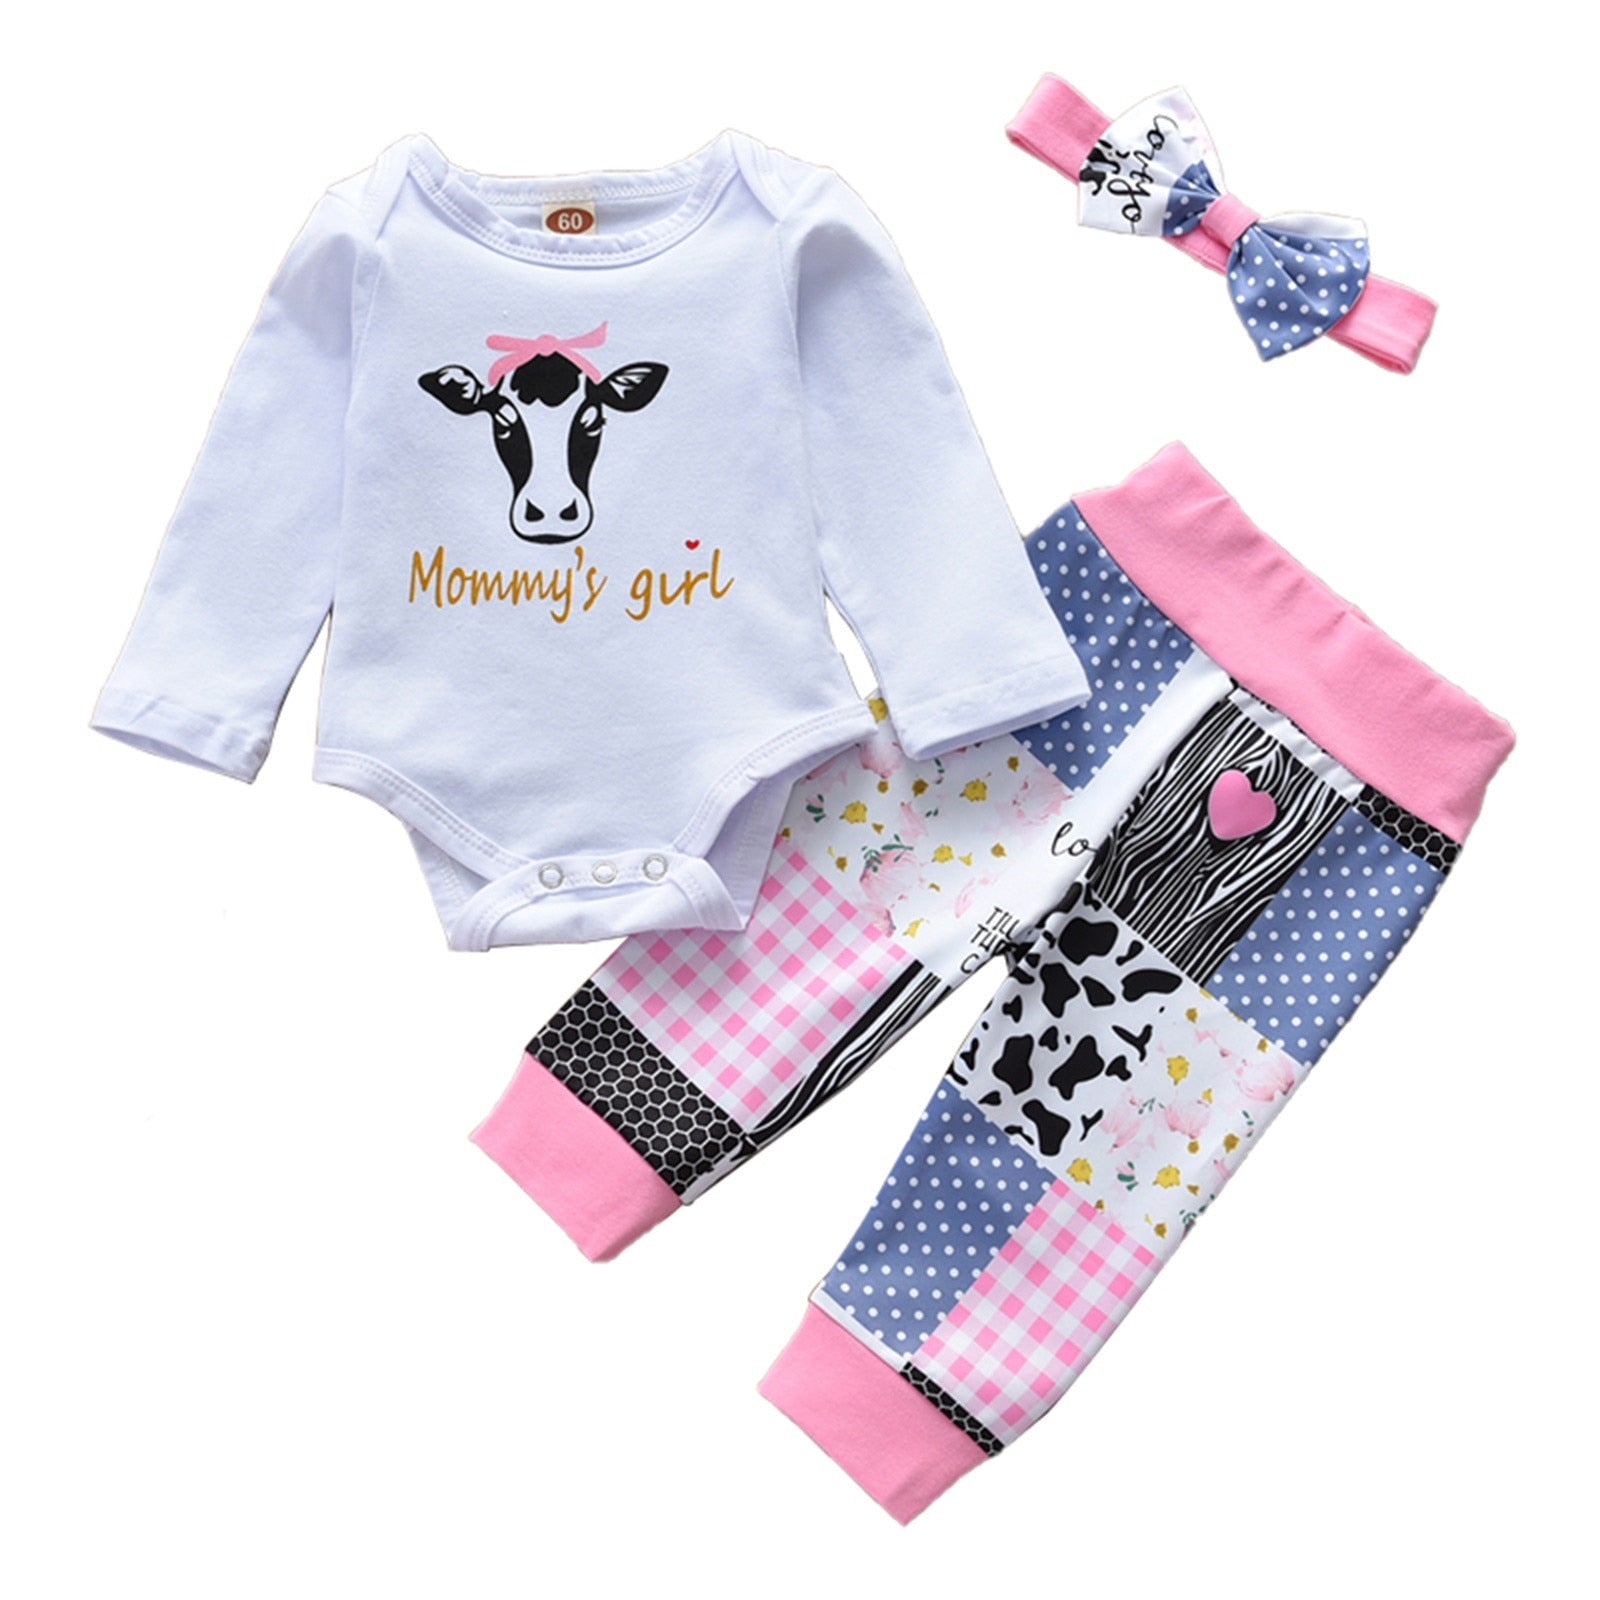 Cute and Comfortable Newborn Baby Girls Clothes Sets for Autumn